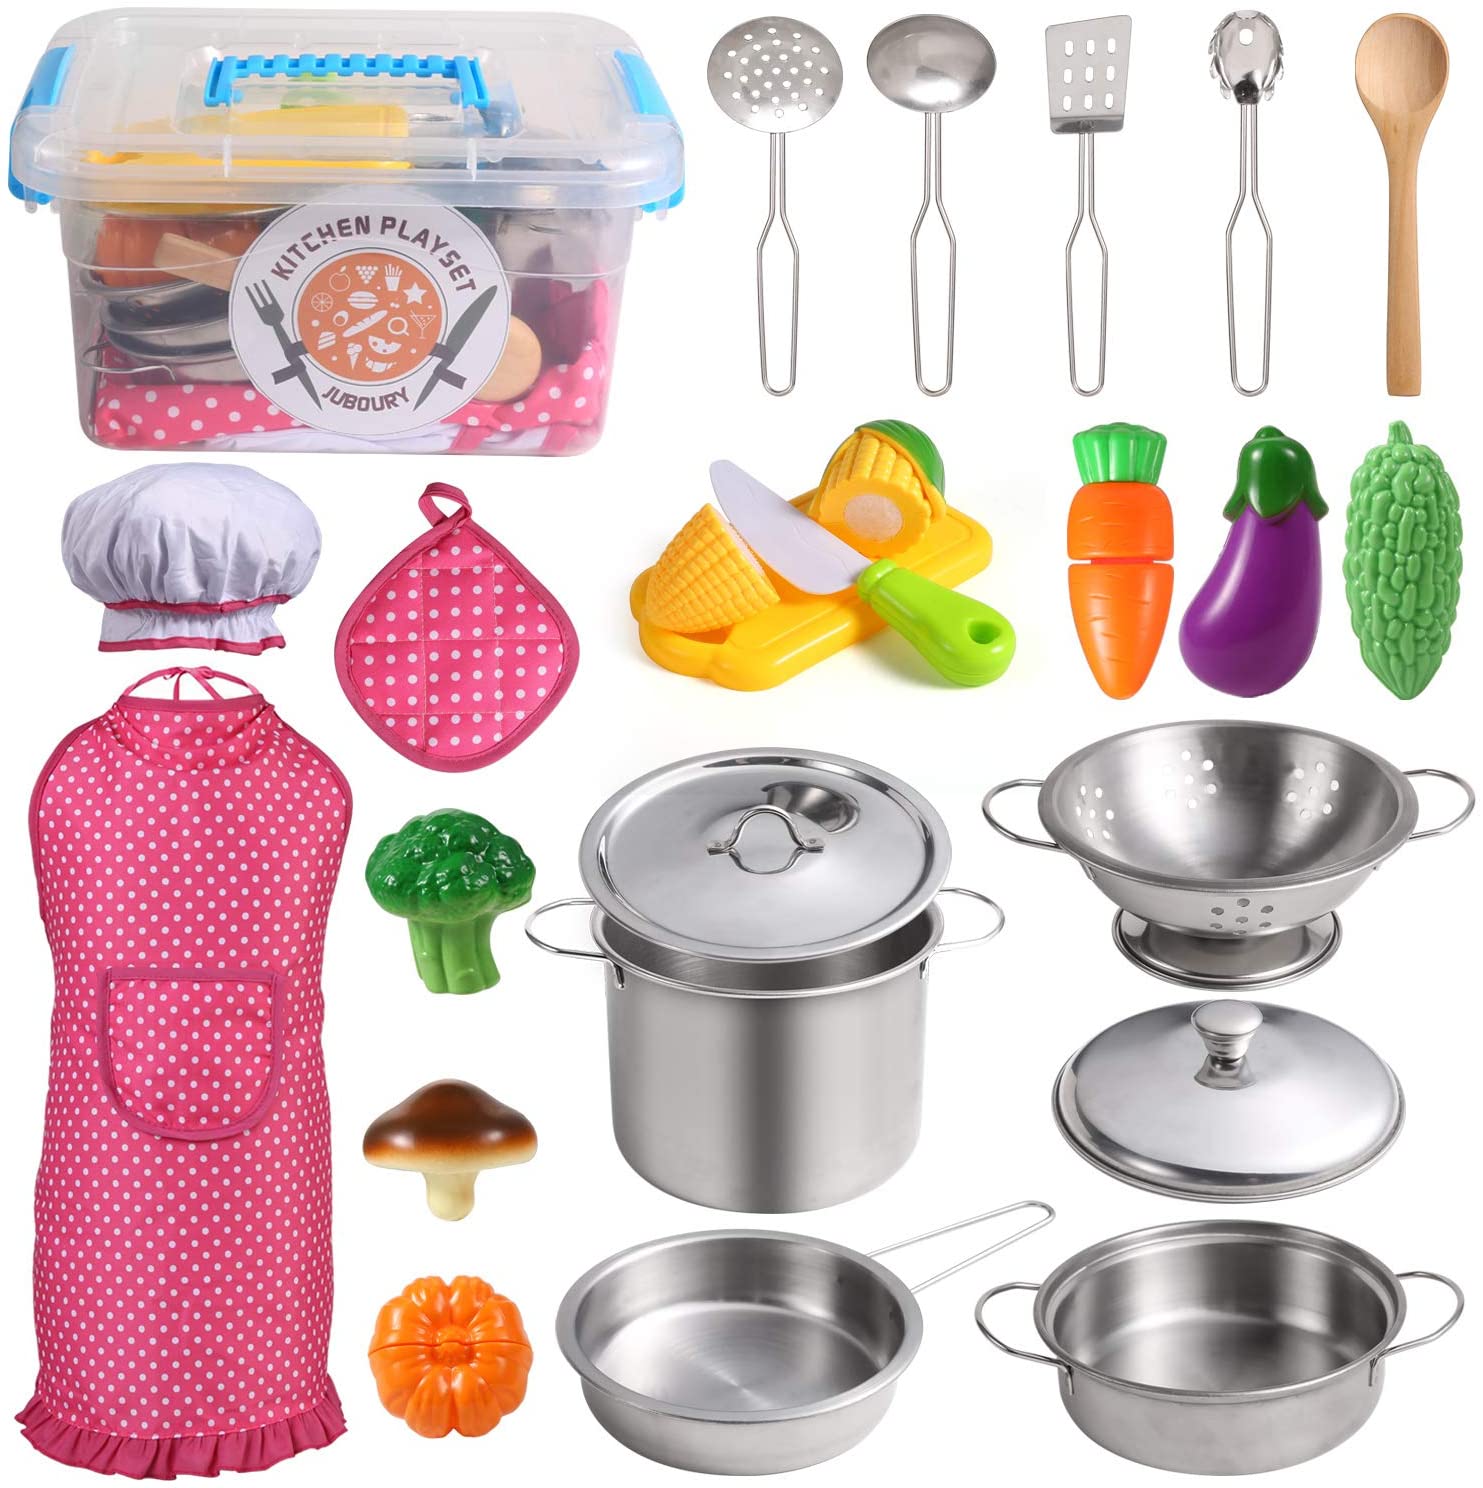 Juboury Play Kitchens Accessories Toys with Stainless Steel Cookware Pots and Pans Set, Cooking